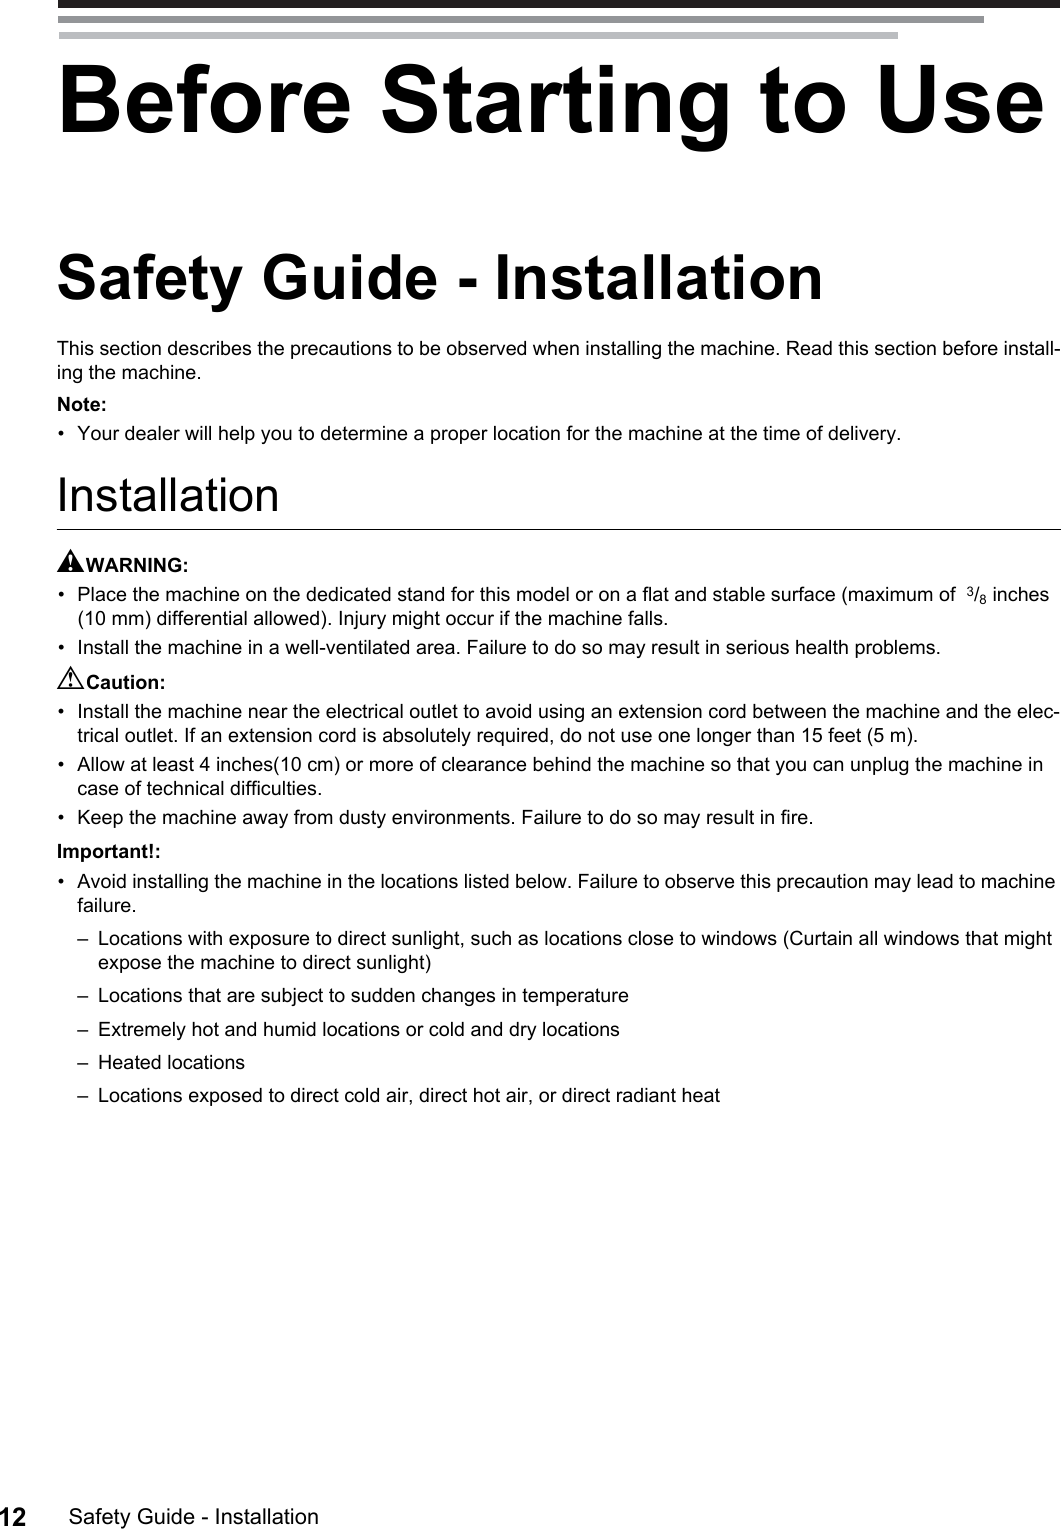 Safety Guide - Installation12Before Starting to UseSafety Guide - InstallationThis section describes the precautions to be observed when installing the machine. Read this section before install-ing the machine.Note:• Your dealer will help you to determine a proper location for the machine at the time of delivery.InstallationAWARNING:• Place the machine on the dedicated stand for this model or on a flat and stable surface (maximum of  3/8 inches (10 mm) differential allowed). Injury might occur if the machine falls.• Install the machine in a well-ventilated area. Failure to do so may result in serious health problems.BCaution:• Install the machine near the electrical outlet to avoid using an extension cord between the machine and the elec-trical outlet. If an extension cord is absolutely required, do not use one longer than 15 feet (5 m).• Allow at least 4 inches(10 cm) or more of clearance behind the machine so that you can unplug the machine in case of technical difficulties.• Keep the machine away from dusty environments. Failure to do so may result in fire.Important!:• Avoid installing the machine in the locations listed below. Failure to observe this precaution may lead to machine failure.– Locations with exposure to direct sunlight, such as locations close to windows (Curtain all windows that might expose the machine to direct sunlight)– Locations that are subject to sudden changes in temperature– Extremely hot and humid locations or cold and dry locations– Heated locations– Locations exposed to direct cold air, direct hot air, or direct radiant heat